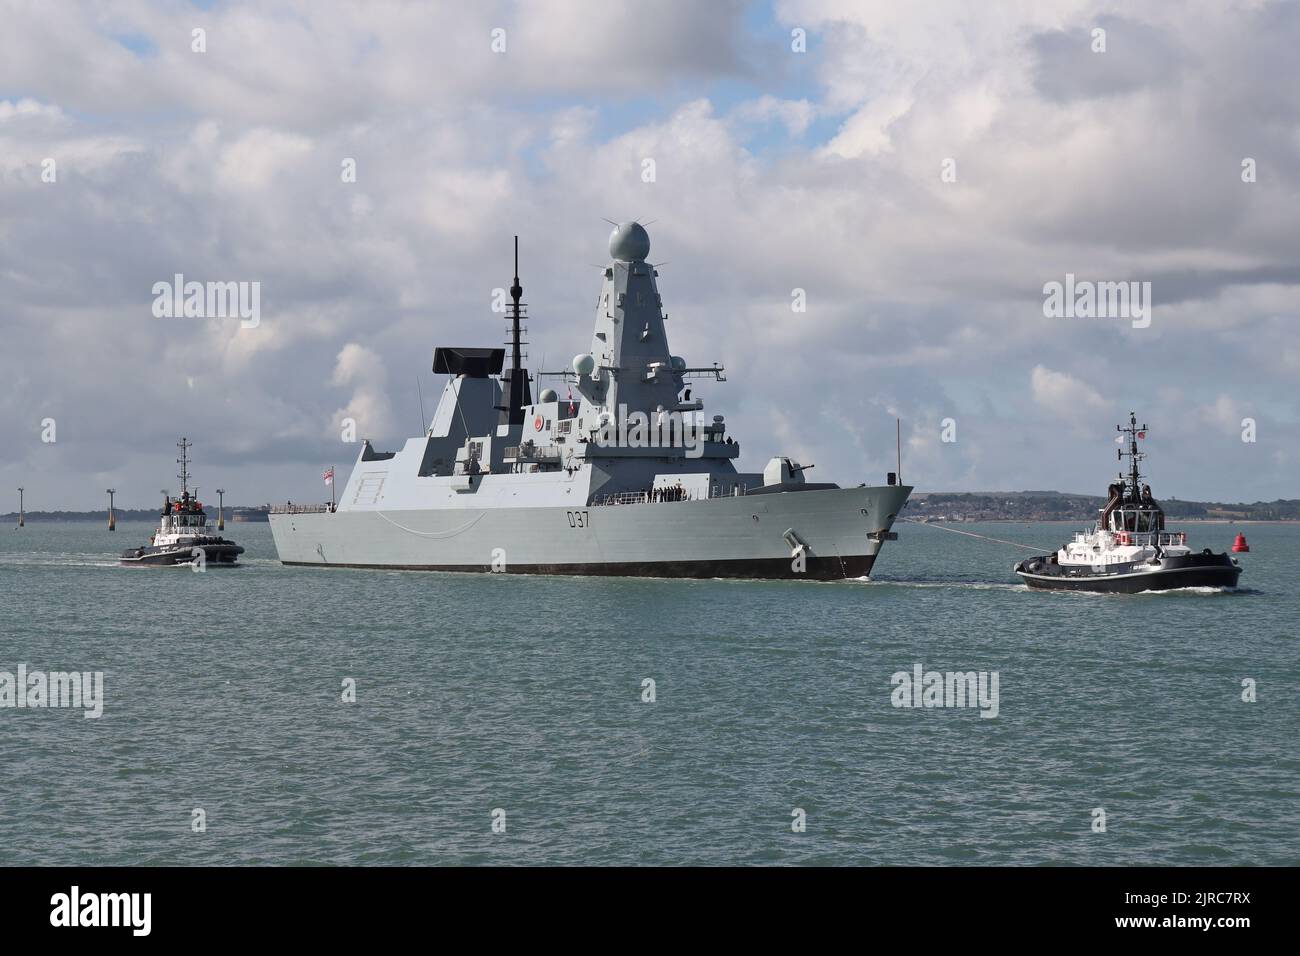 Naval Base tugs BOUNTIFUL and INDULGENT assist the Royal Navy Type 45 destroyer HMS DUNCAN into harbour Stock Photo